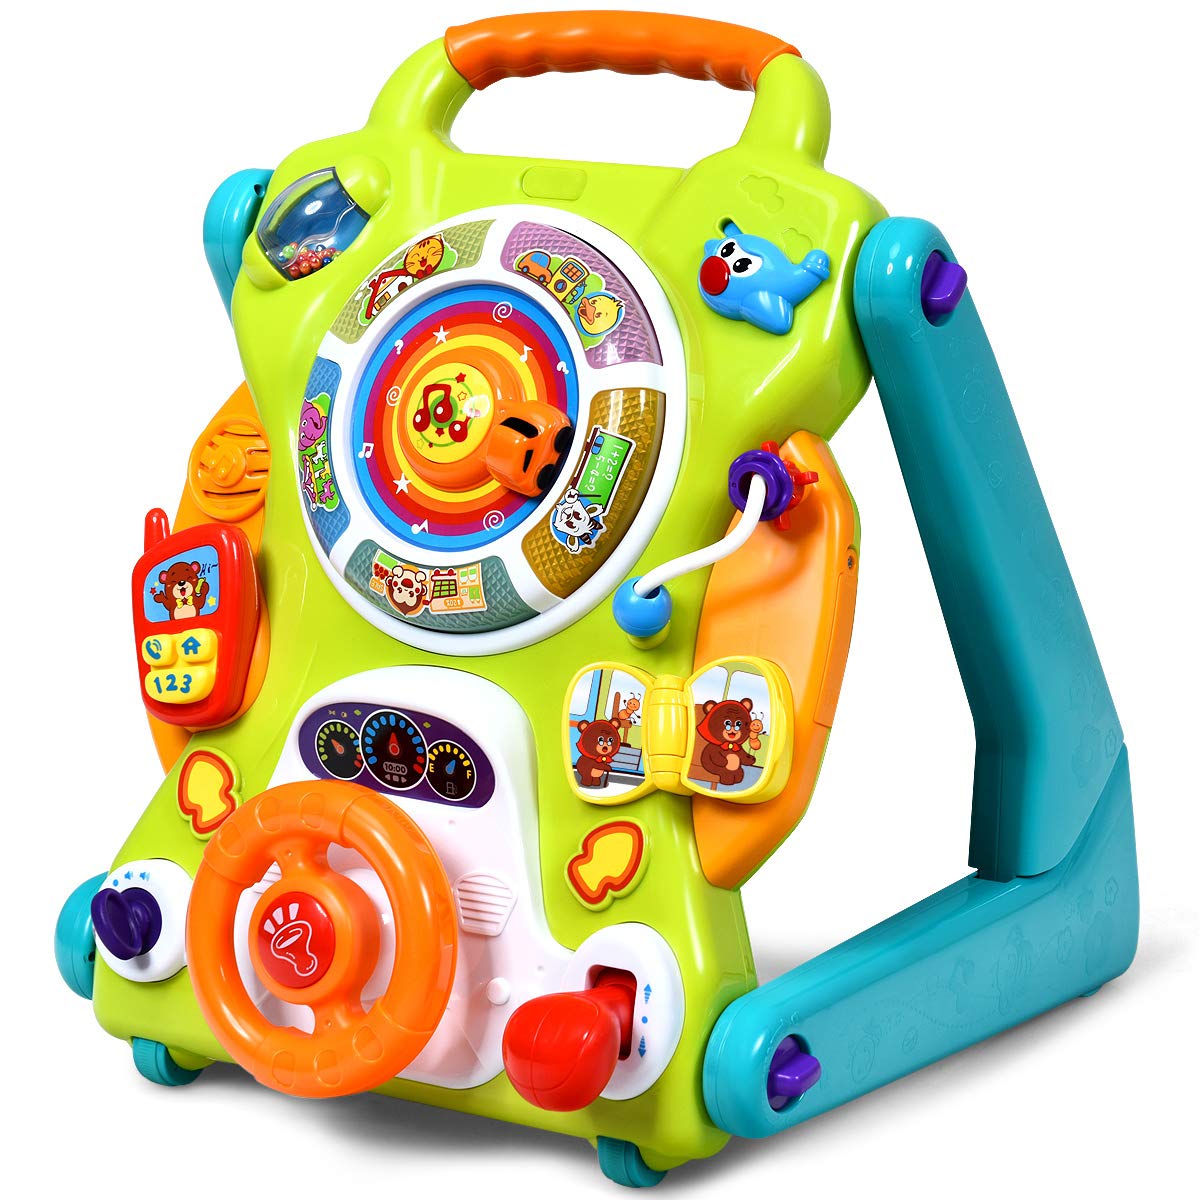 BABY JOY 3-In-1 Sit-To-Stand Play-Time Activity Walker